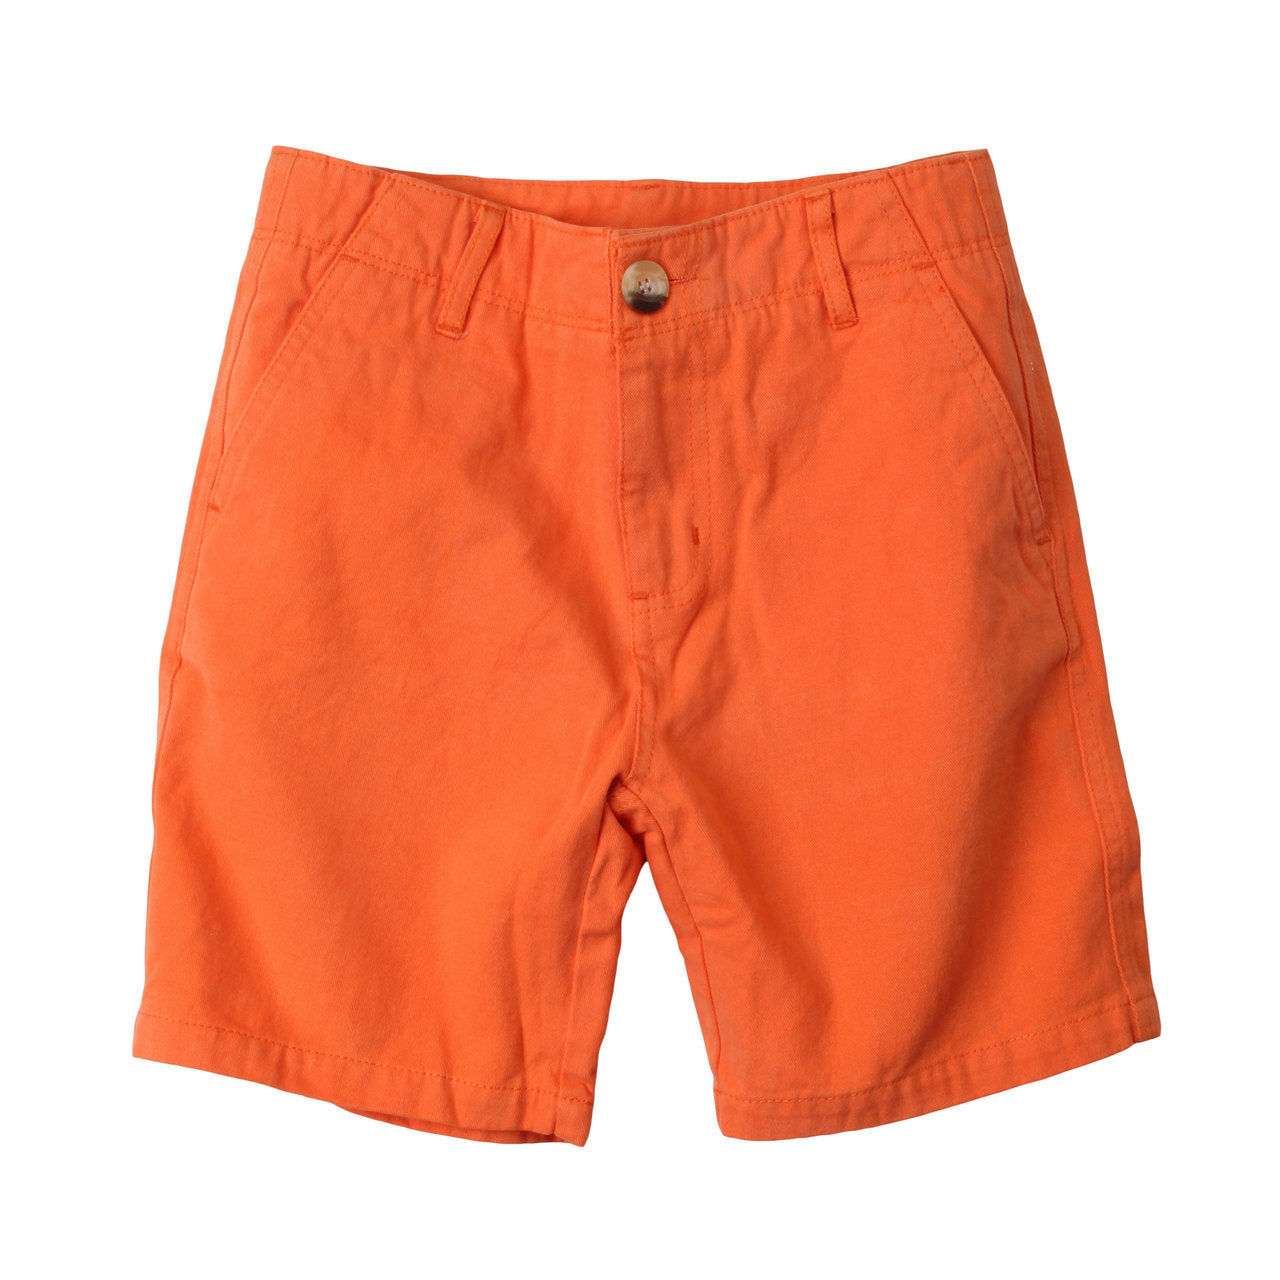 Wes & Willy JT Twill Short/Tangerine